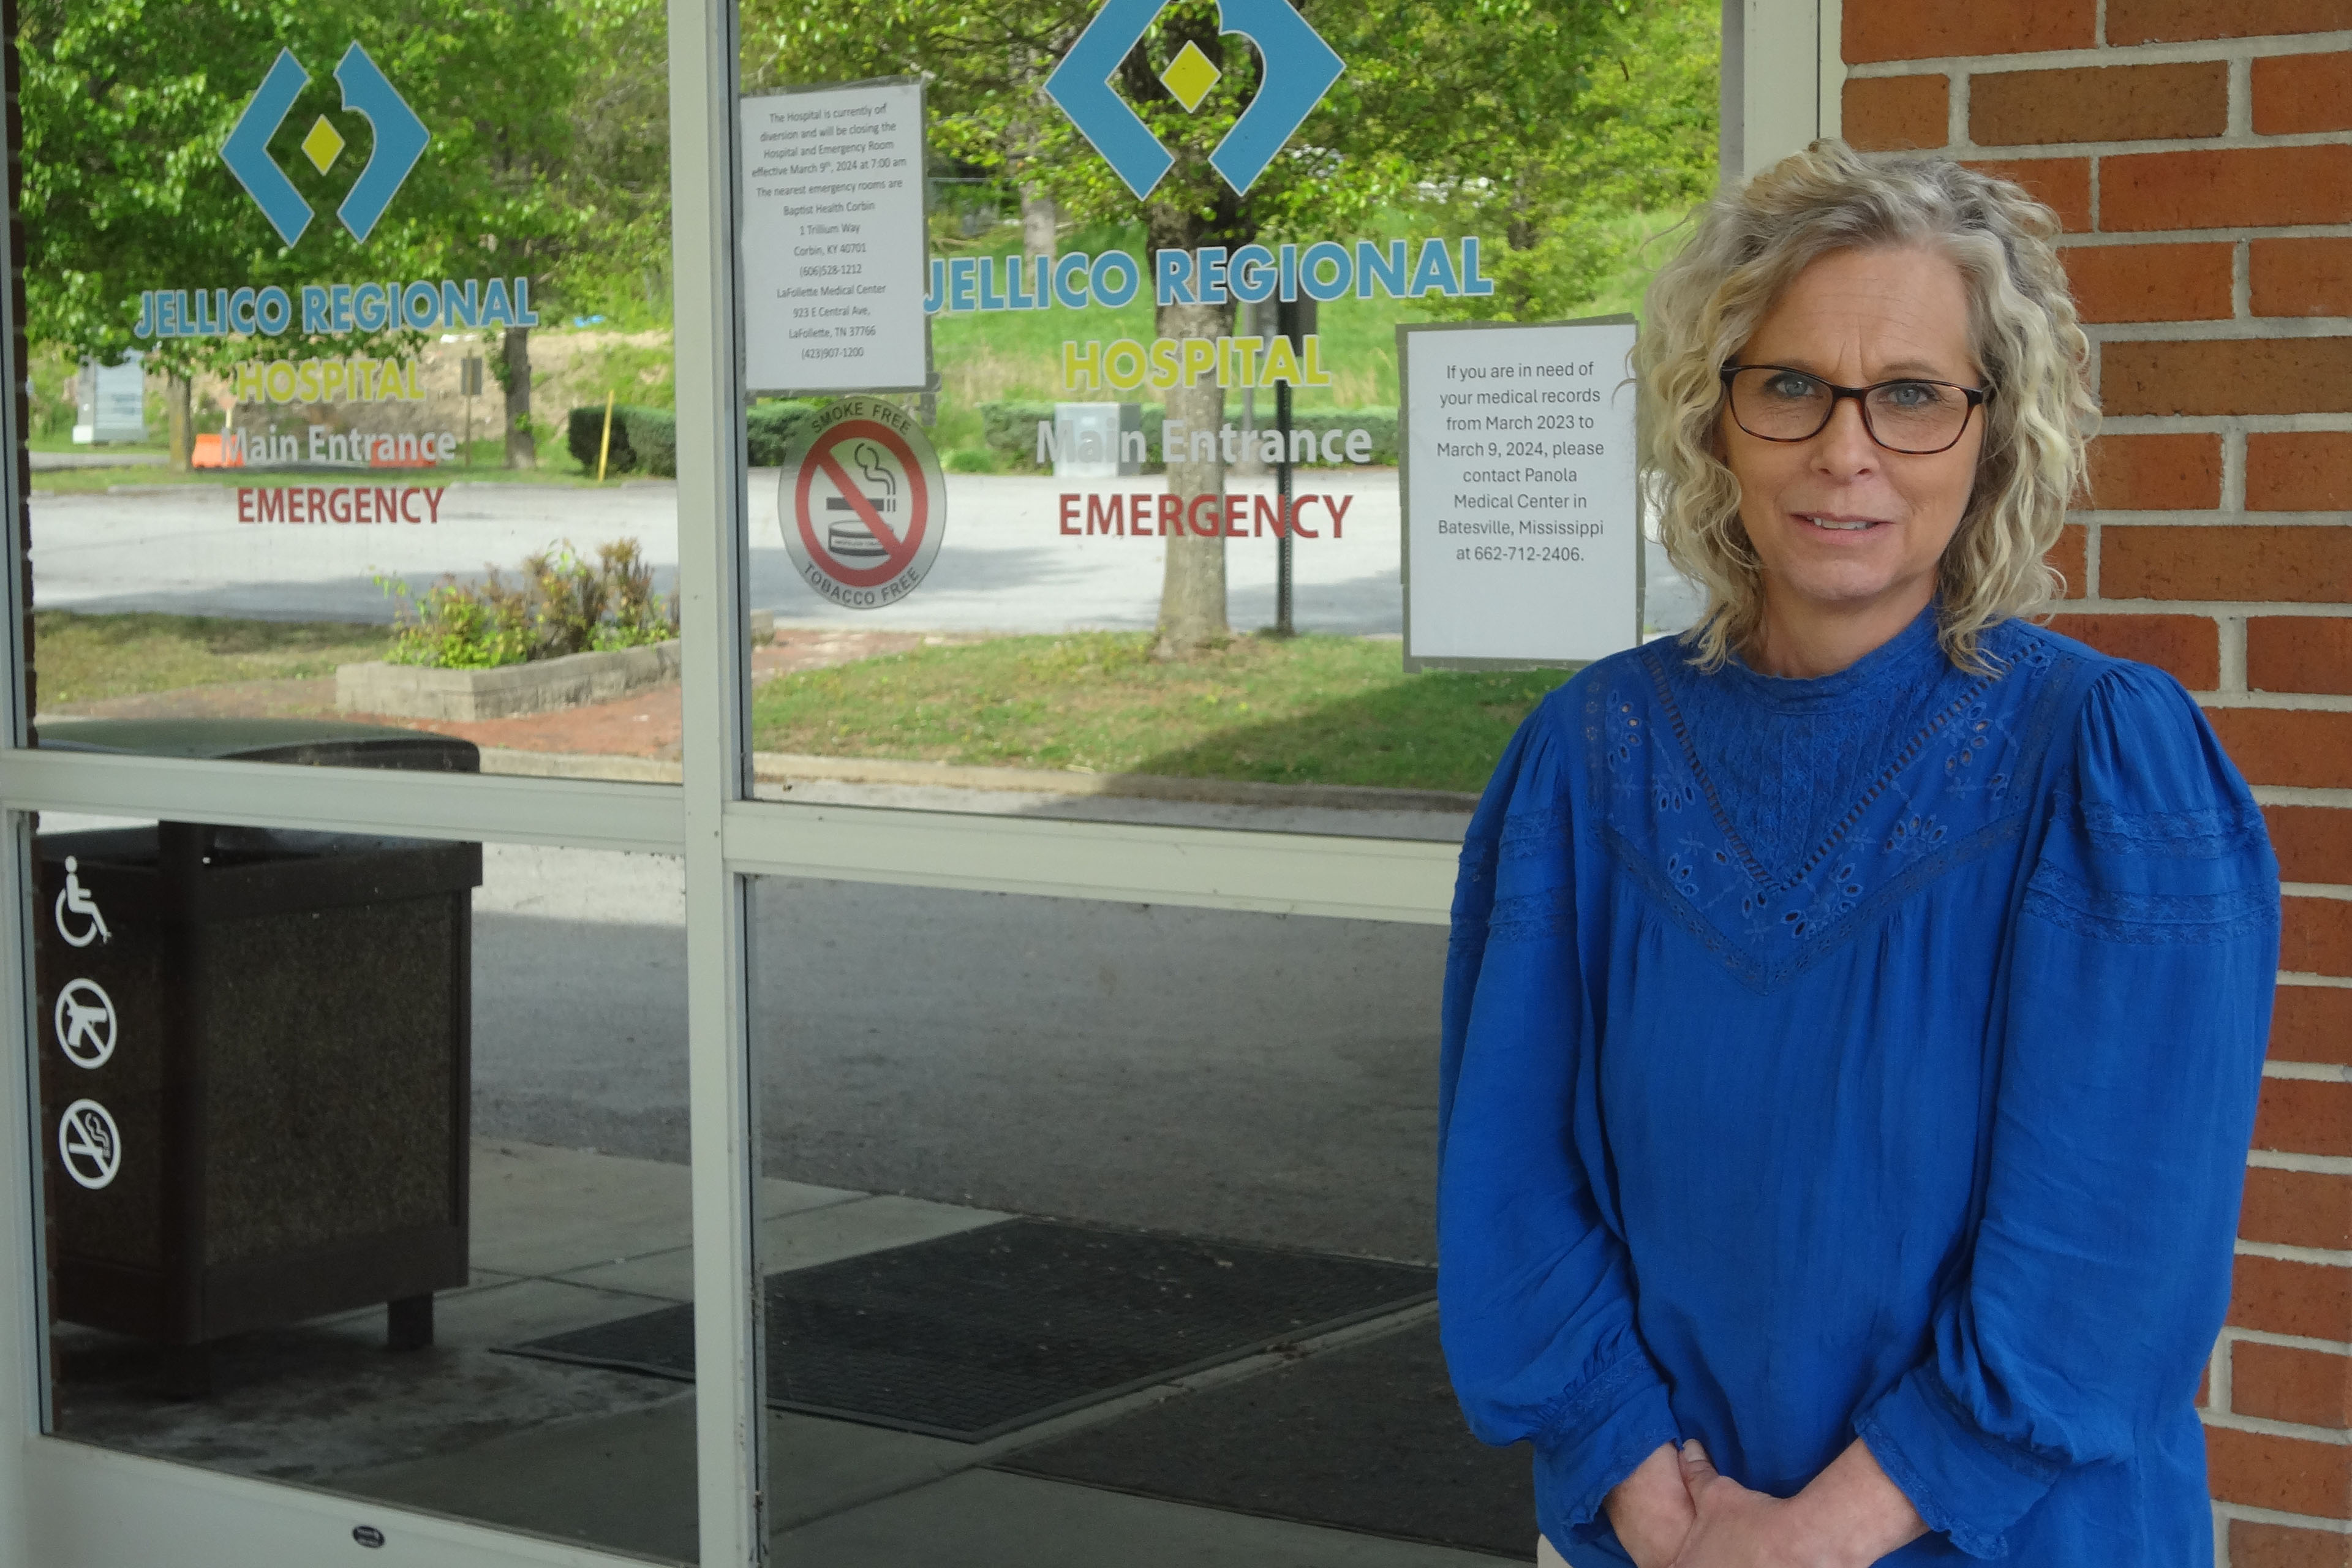 Sandy Terry, wearing a vivid blue blouse, stands beside glass doors that are the entrance to the former Jellico Medical Center.